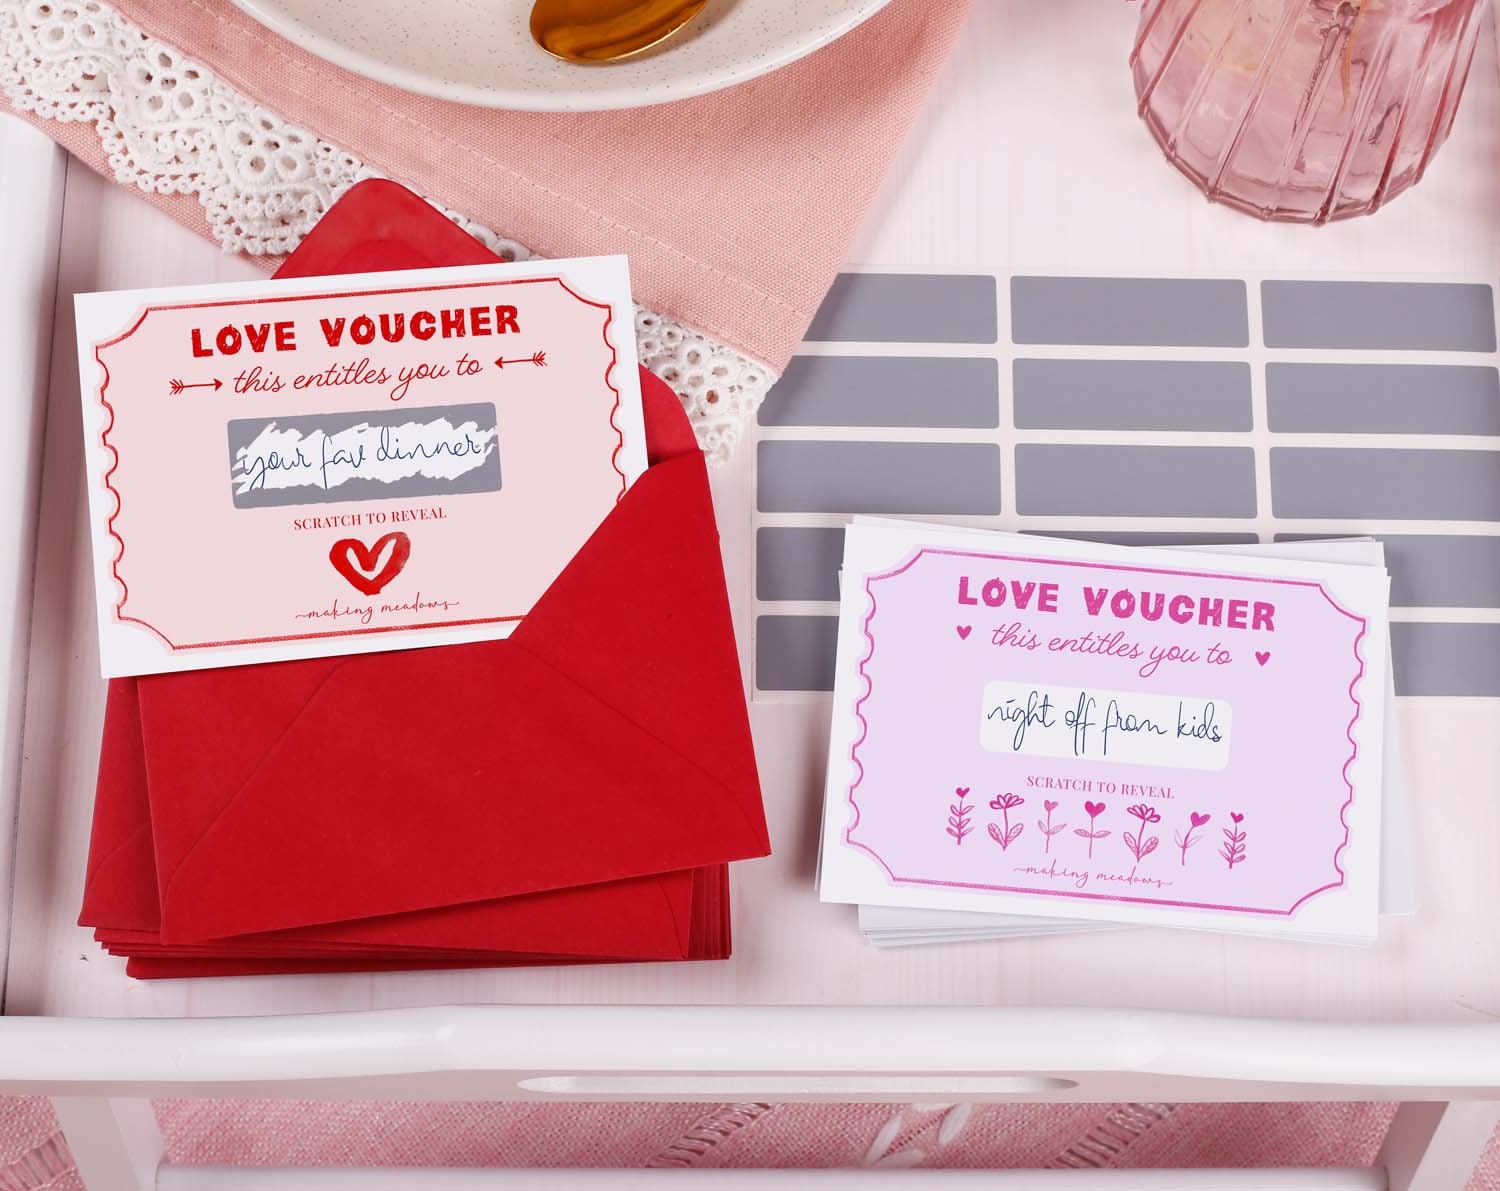 Love Vouchers With Scratch Off Surprise